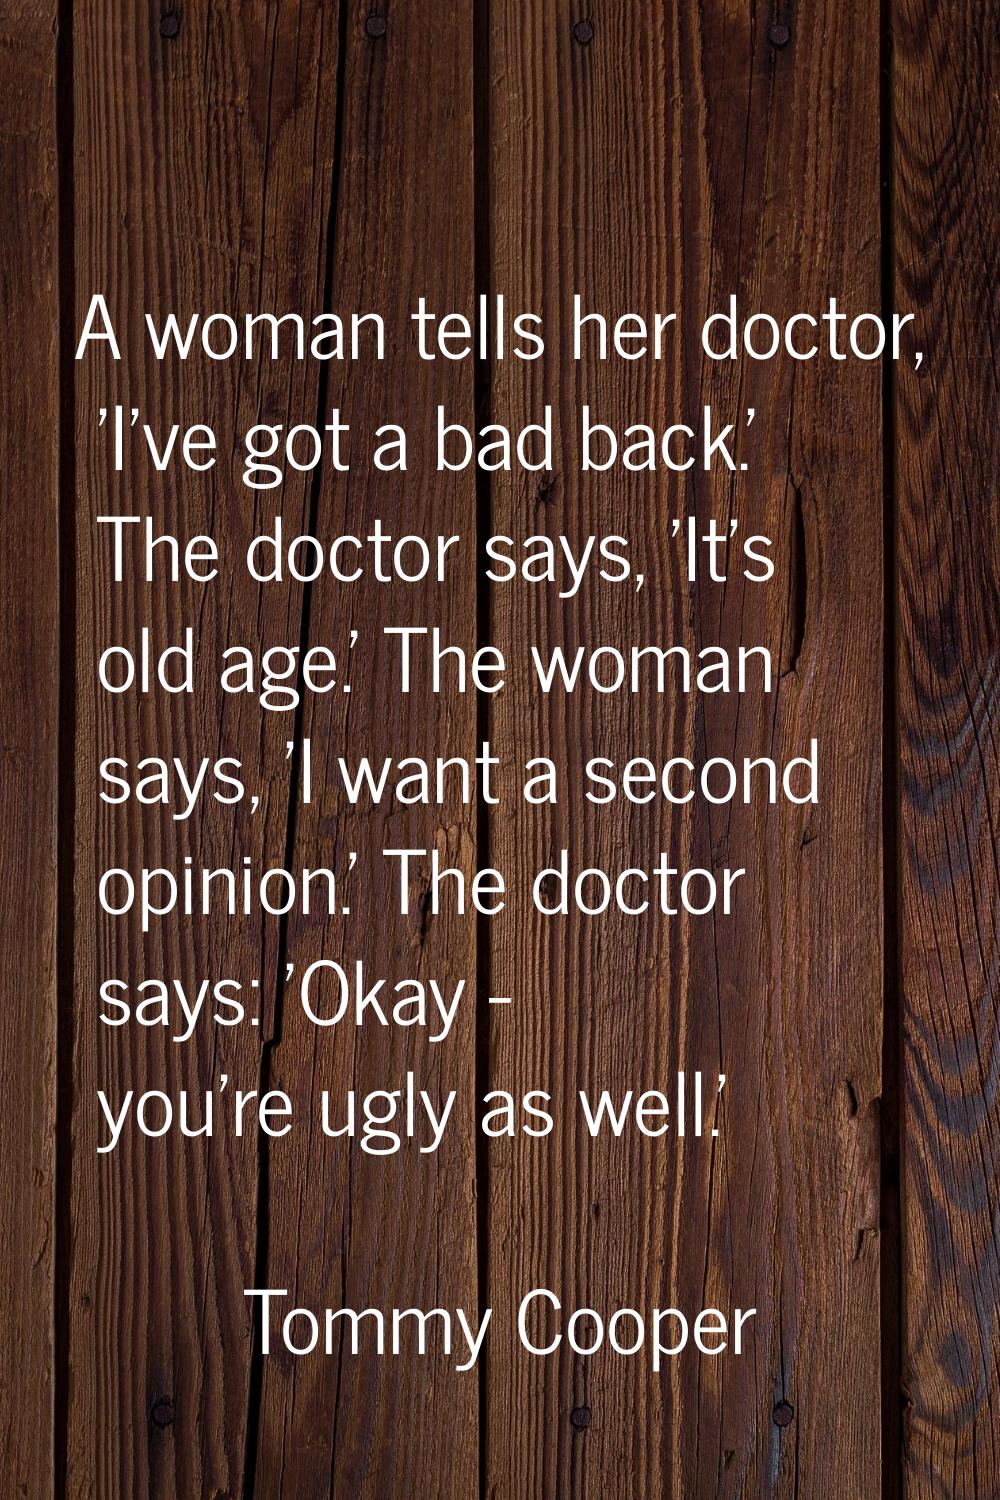 A woman tells her doctor, 'I've got a bad back.' The doctor says, 'It's old age.' The woman says, '